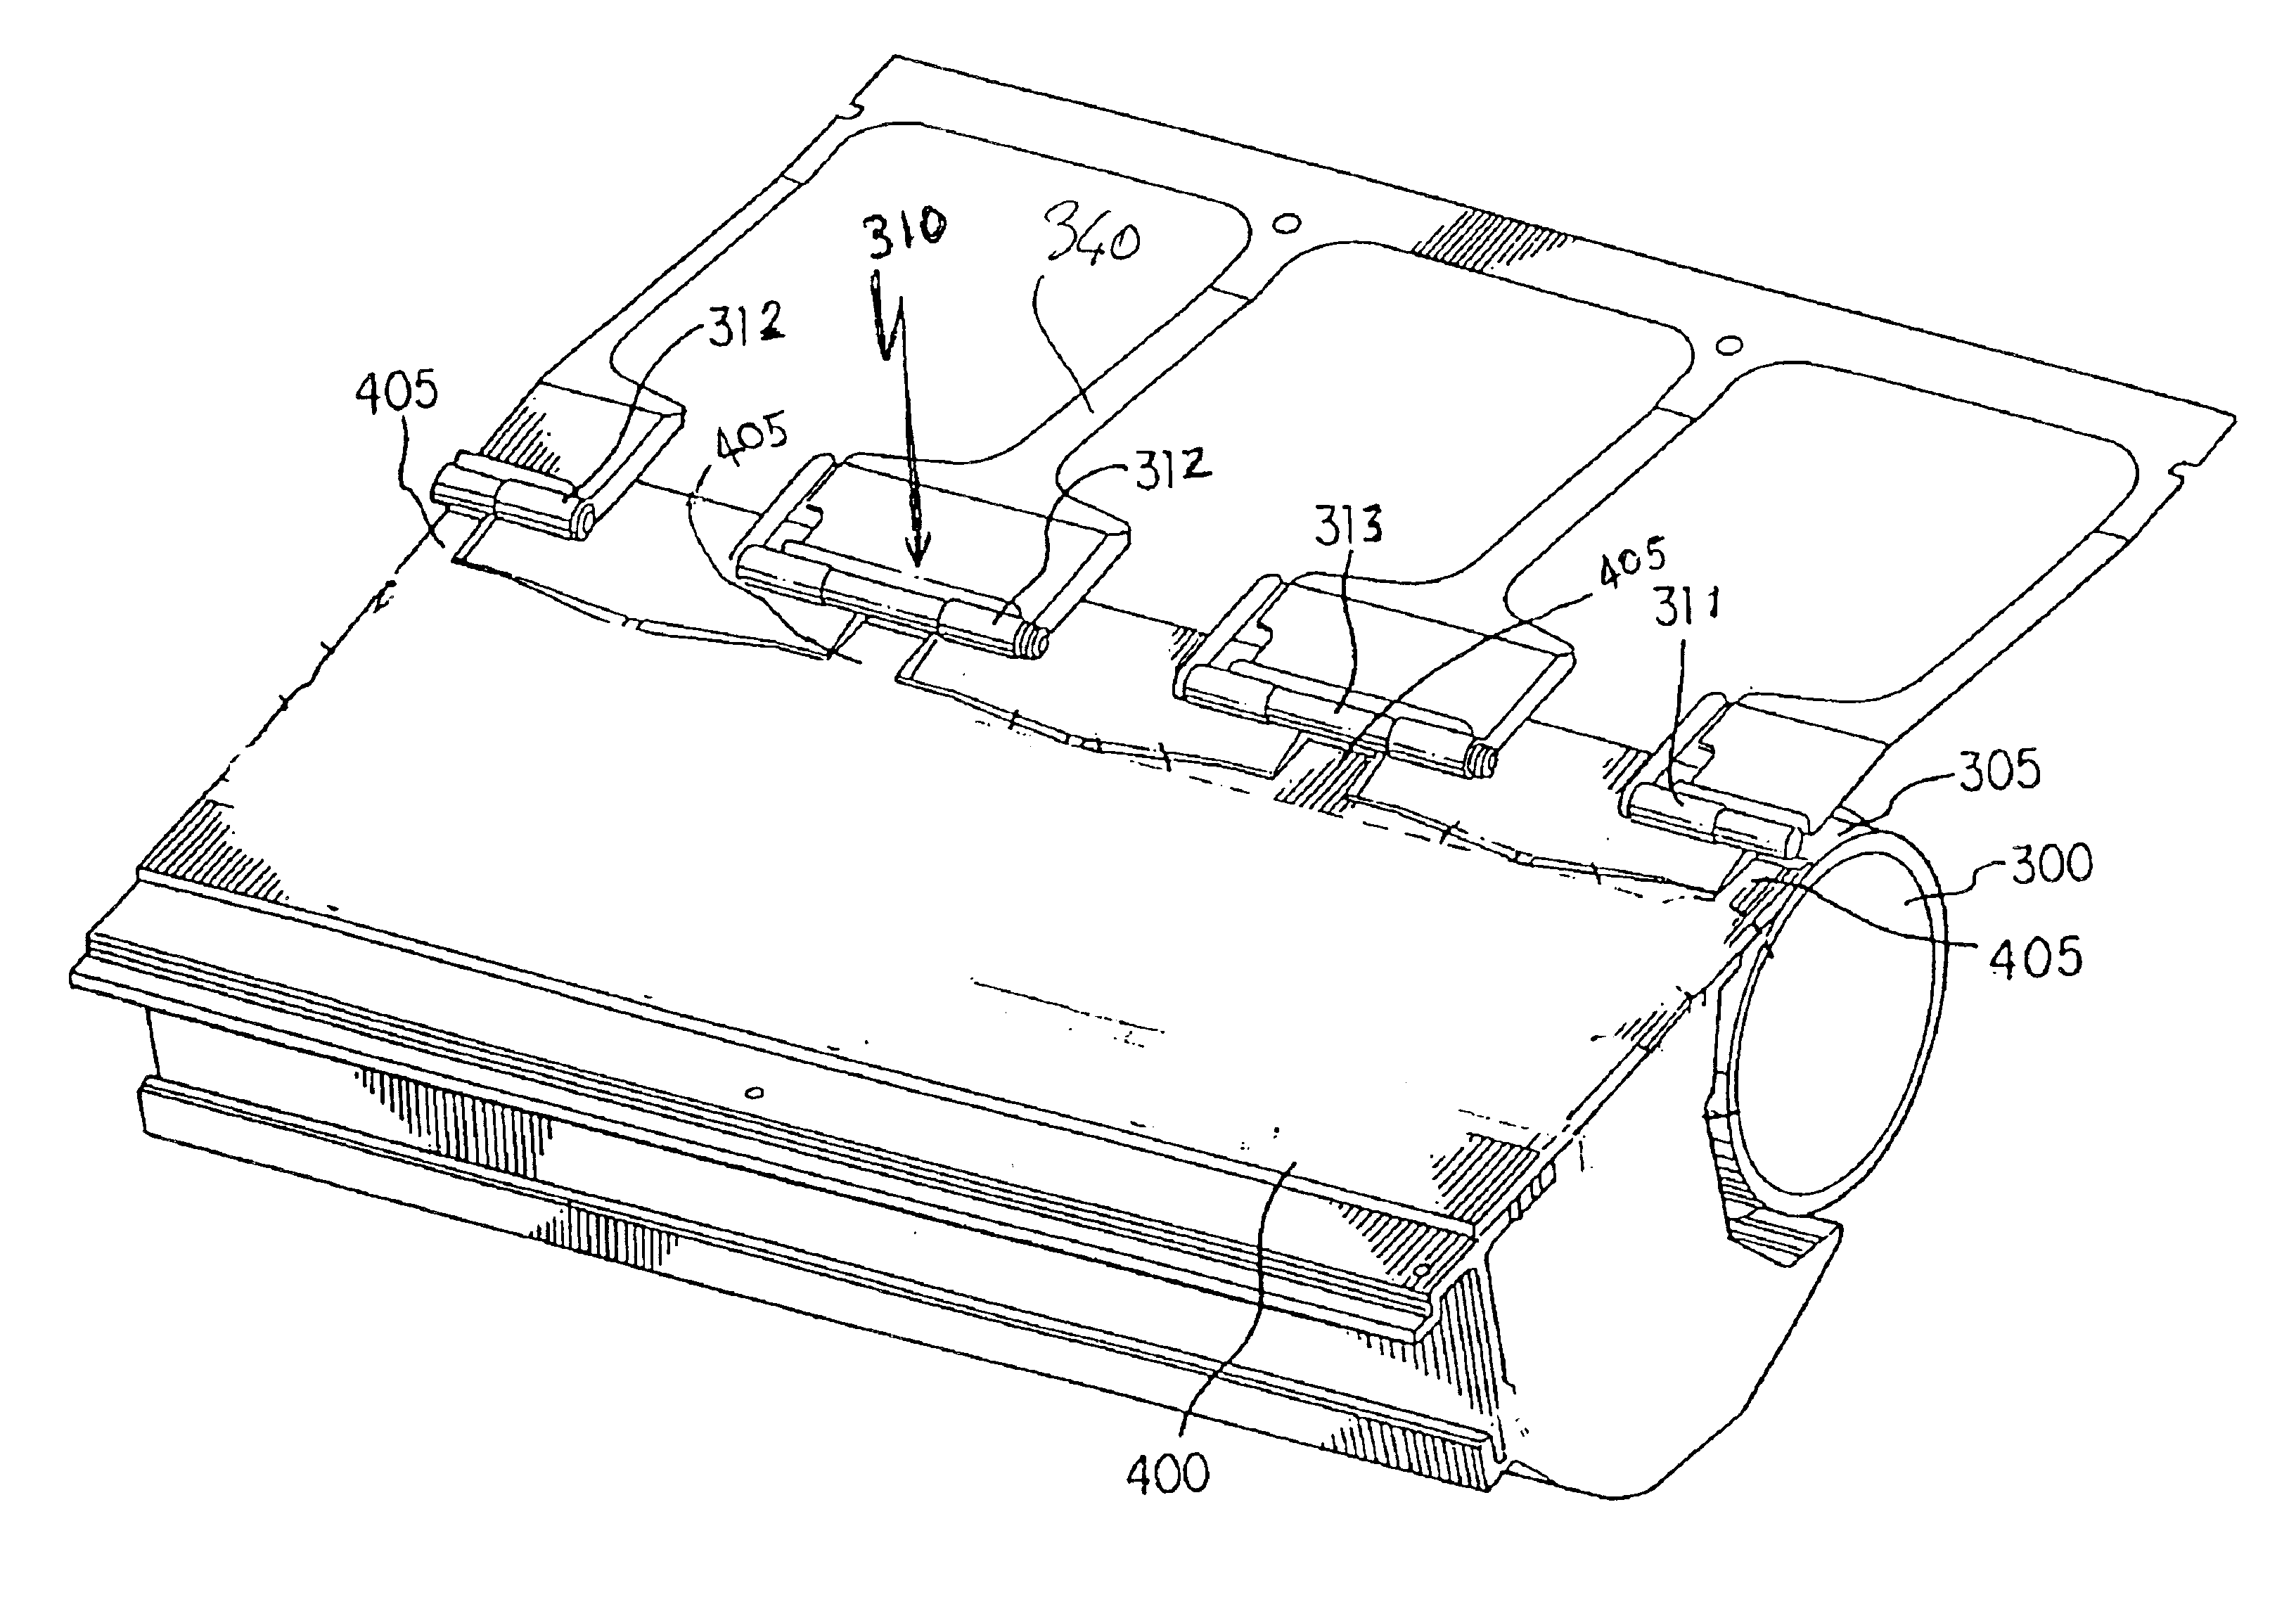 Inkjet apparatus and method for controlling undulation on media